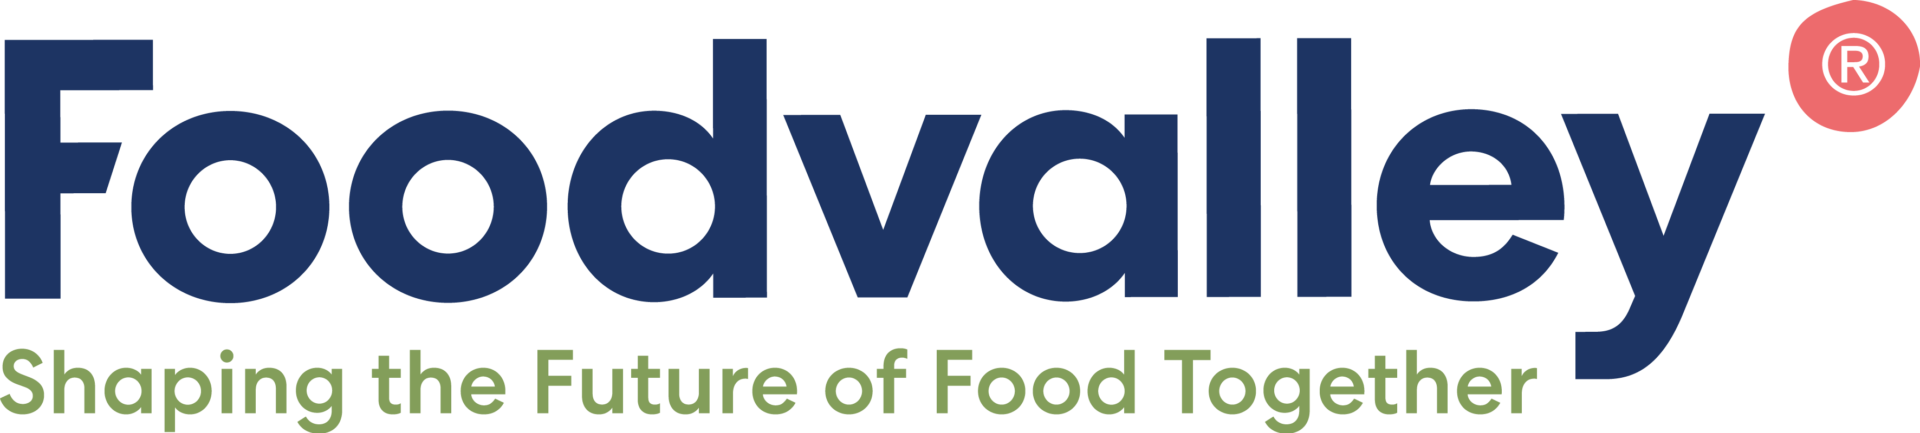 Foodvalley